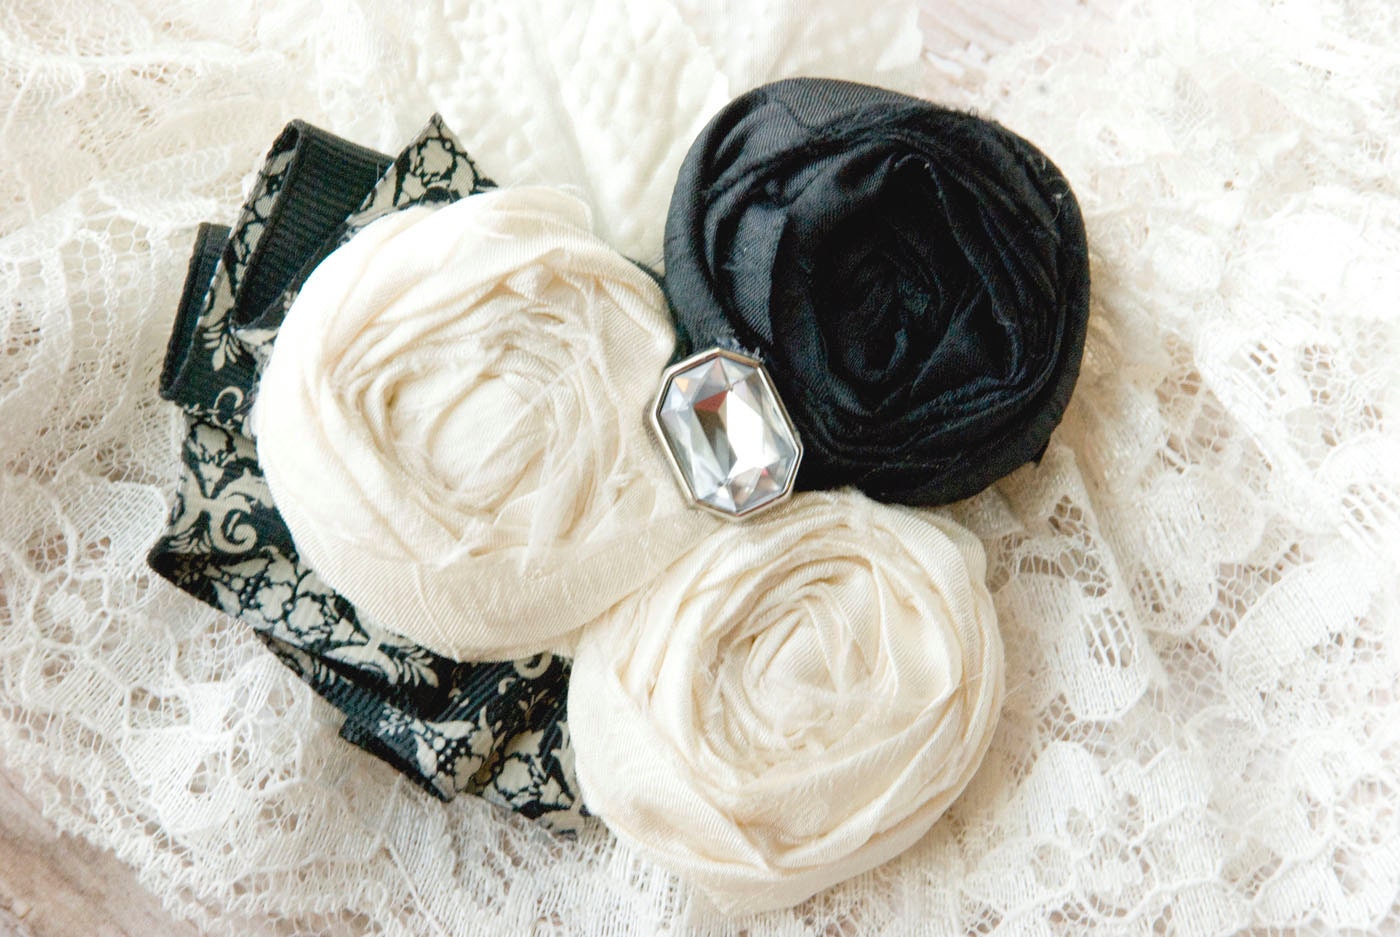 Damask Wedding Garter SET in Black and White ( choose your accent colors) Vintage Style Brooch, pearls, and lace accents